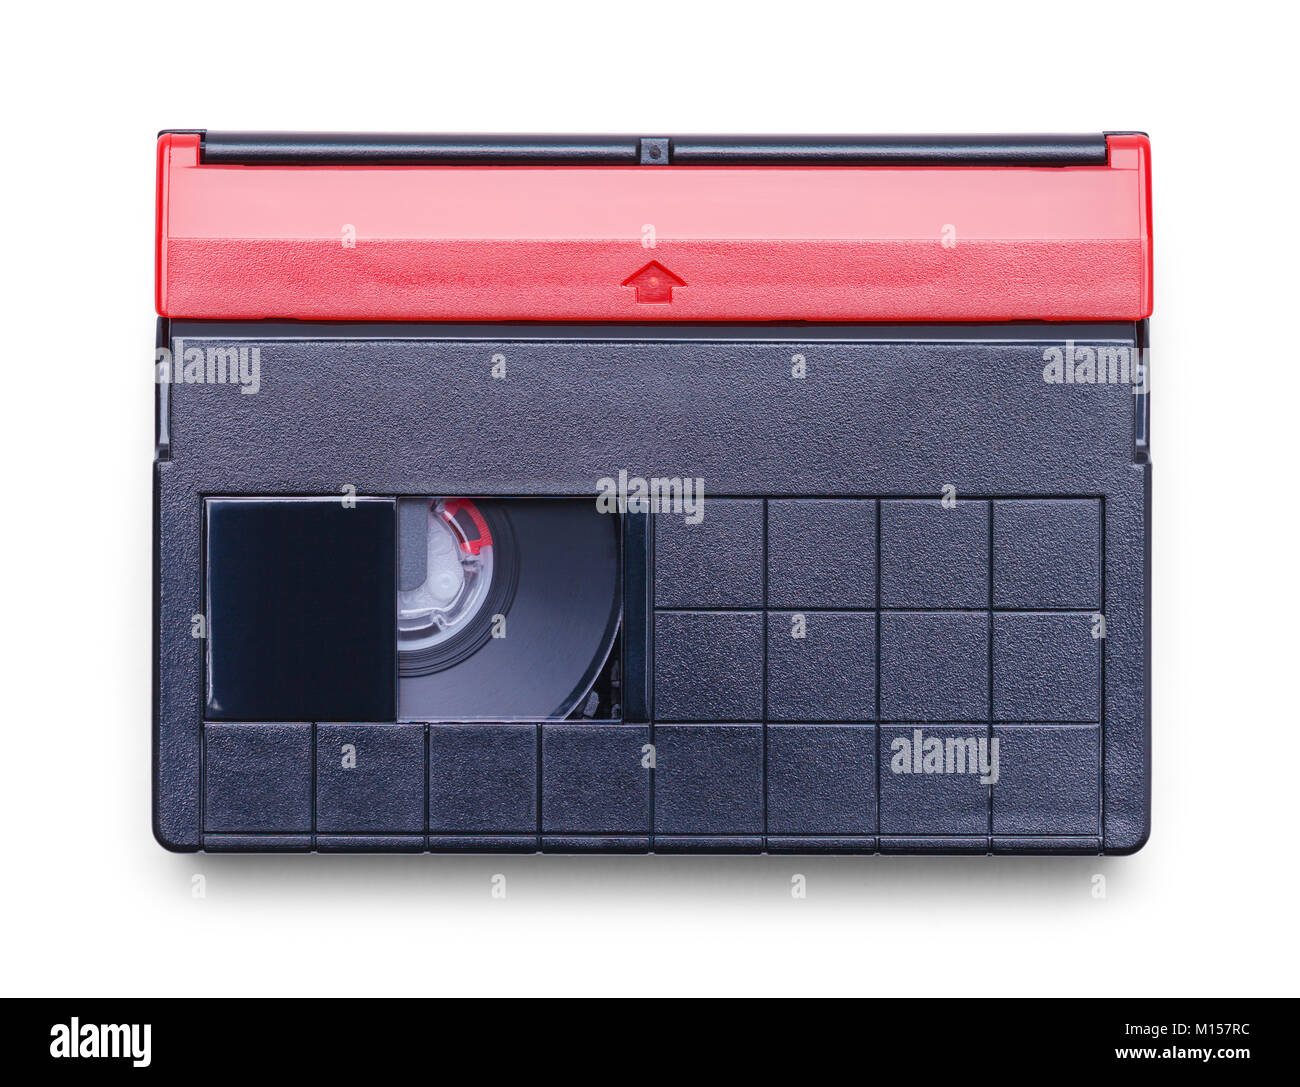 Video Cassette Tape for Home Movie Camera Isolated on a White Background. Stock Photo